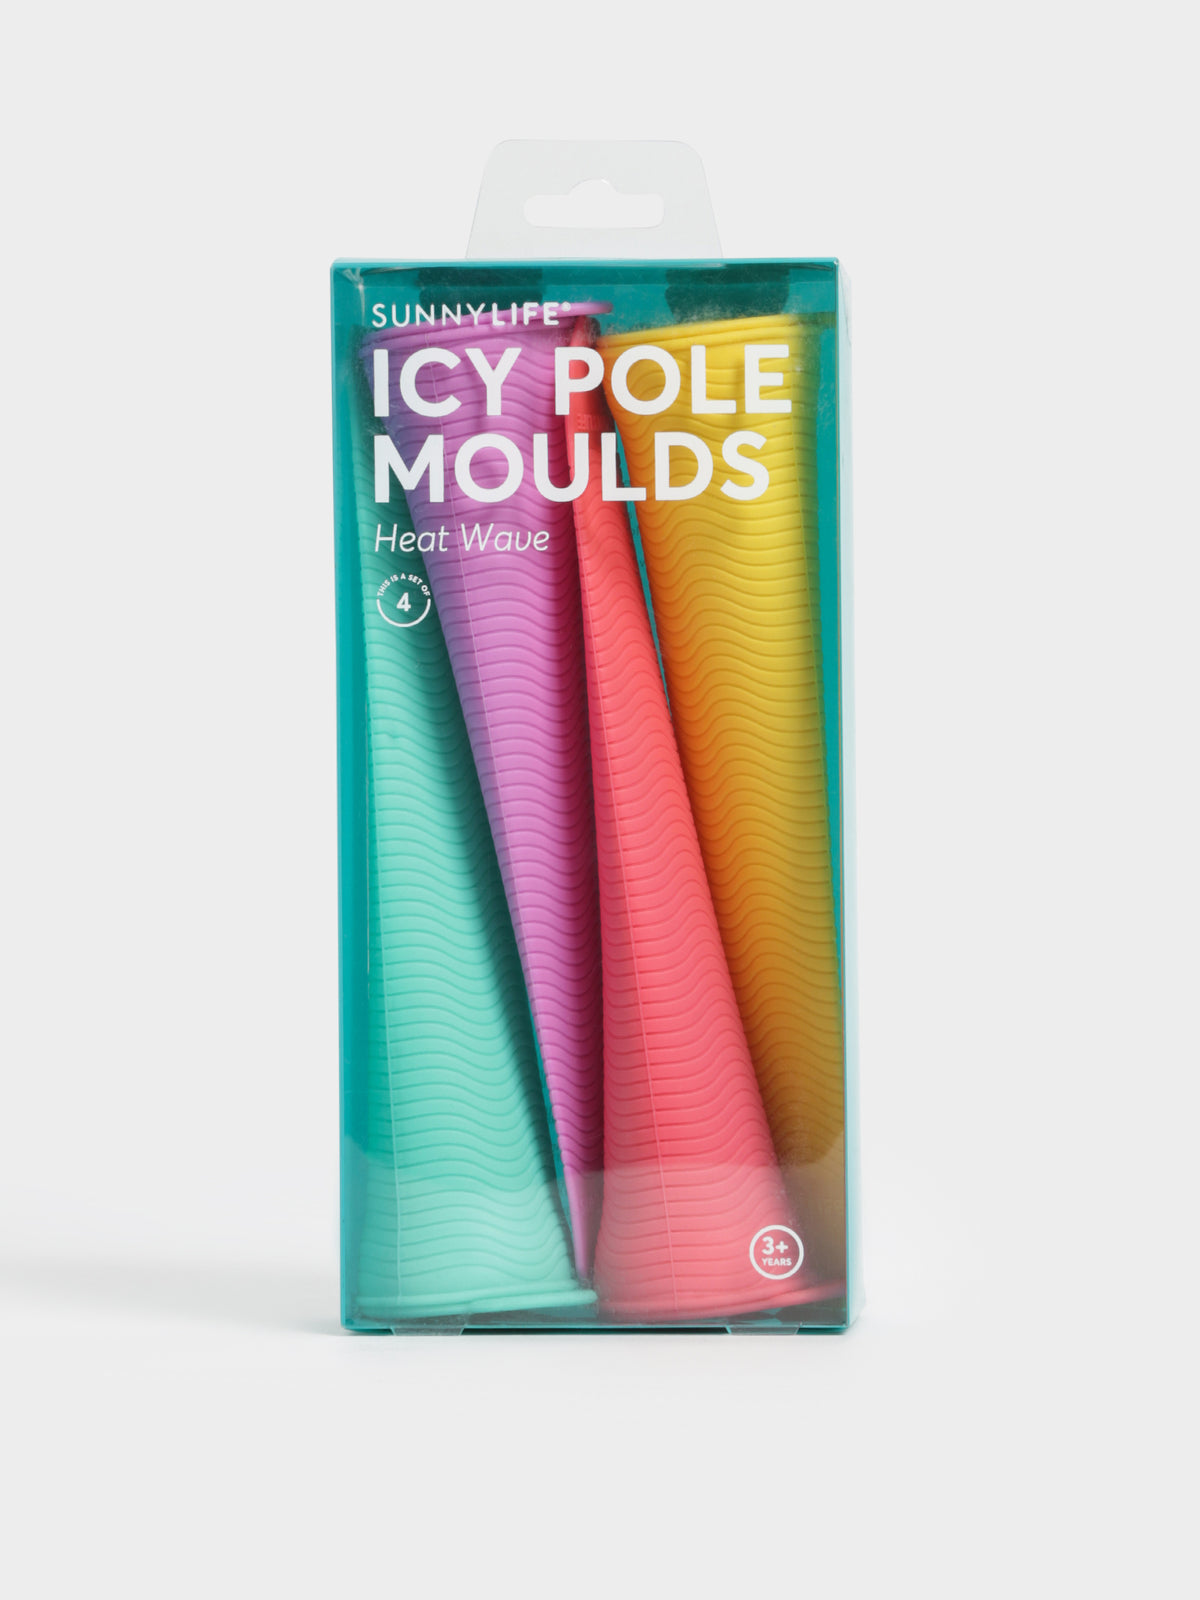 Icy Pole Moulds in Heat Wave